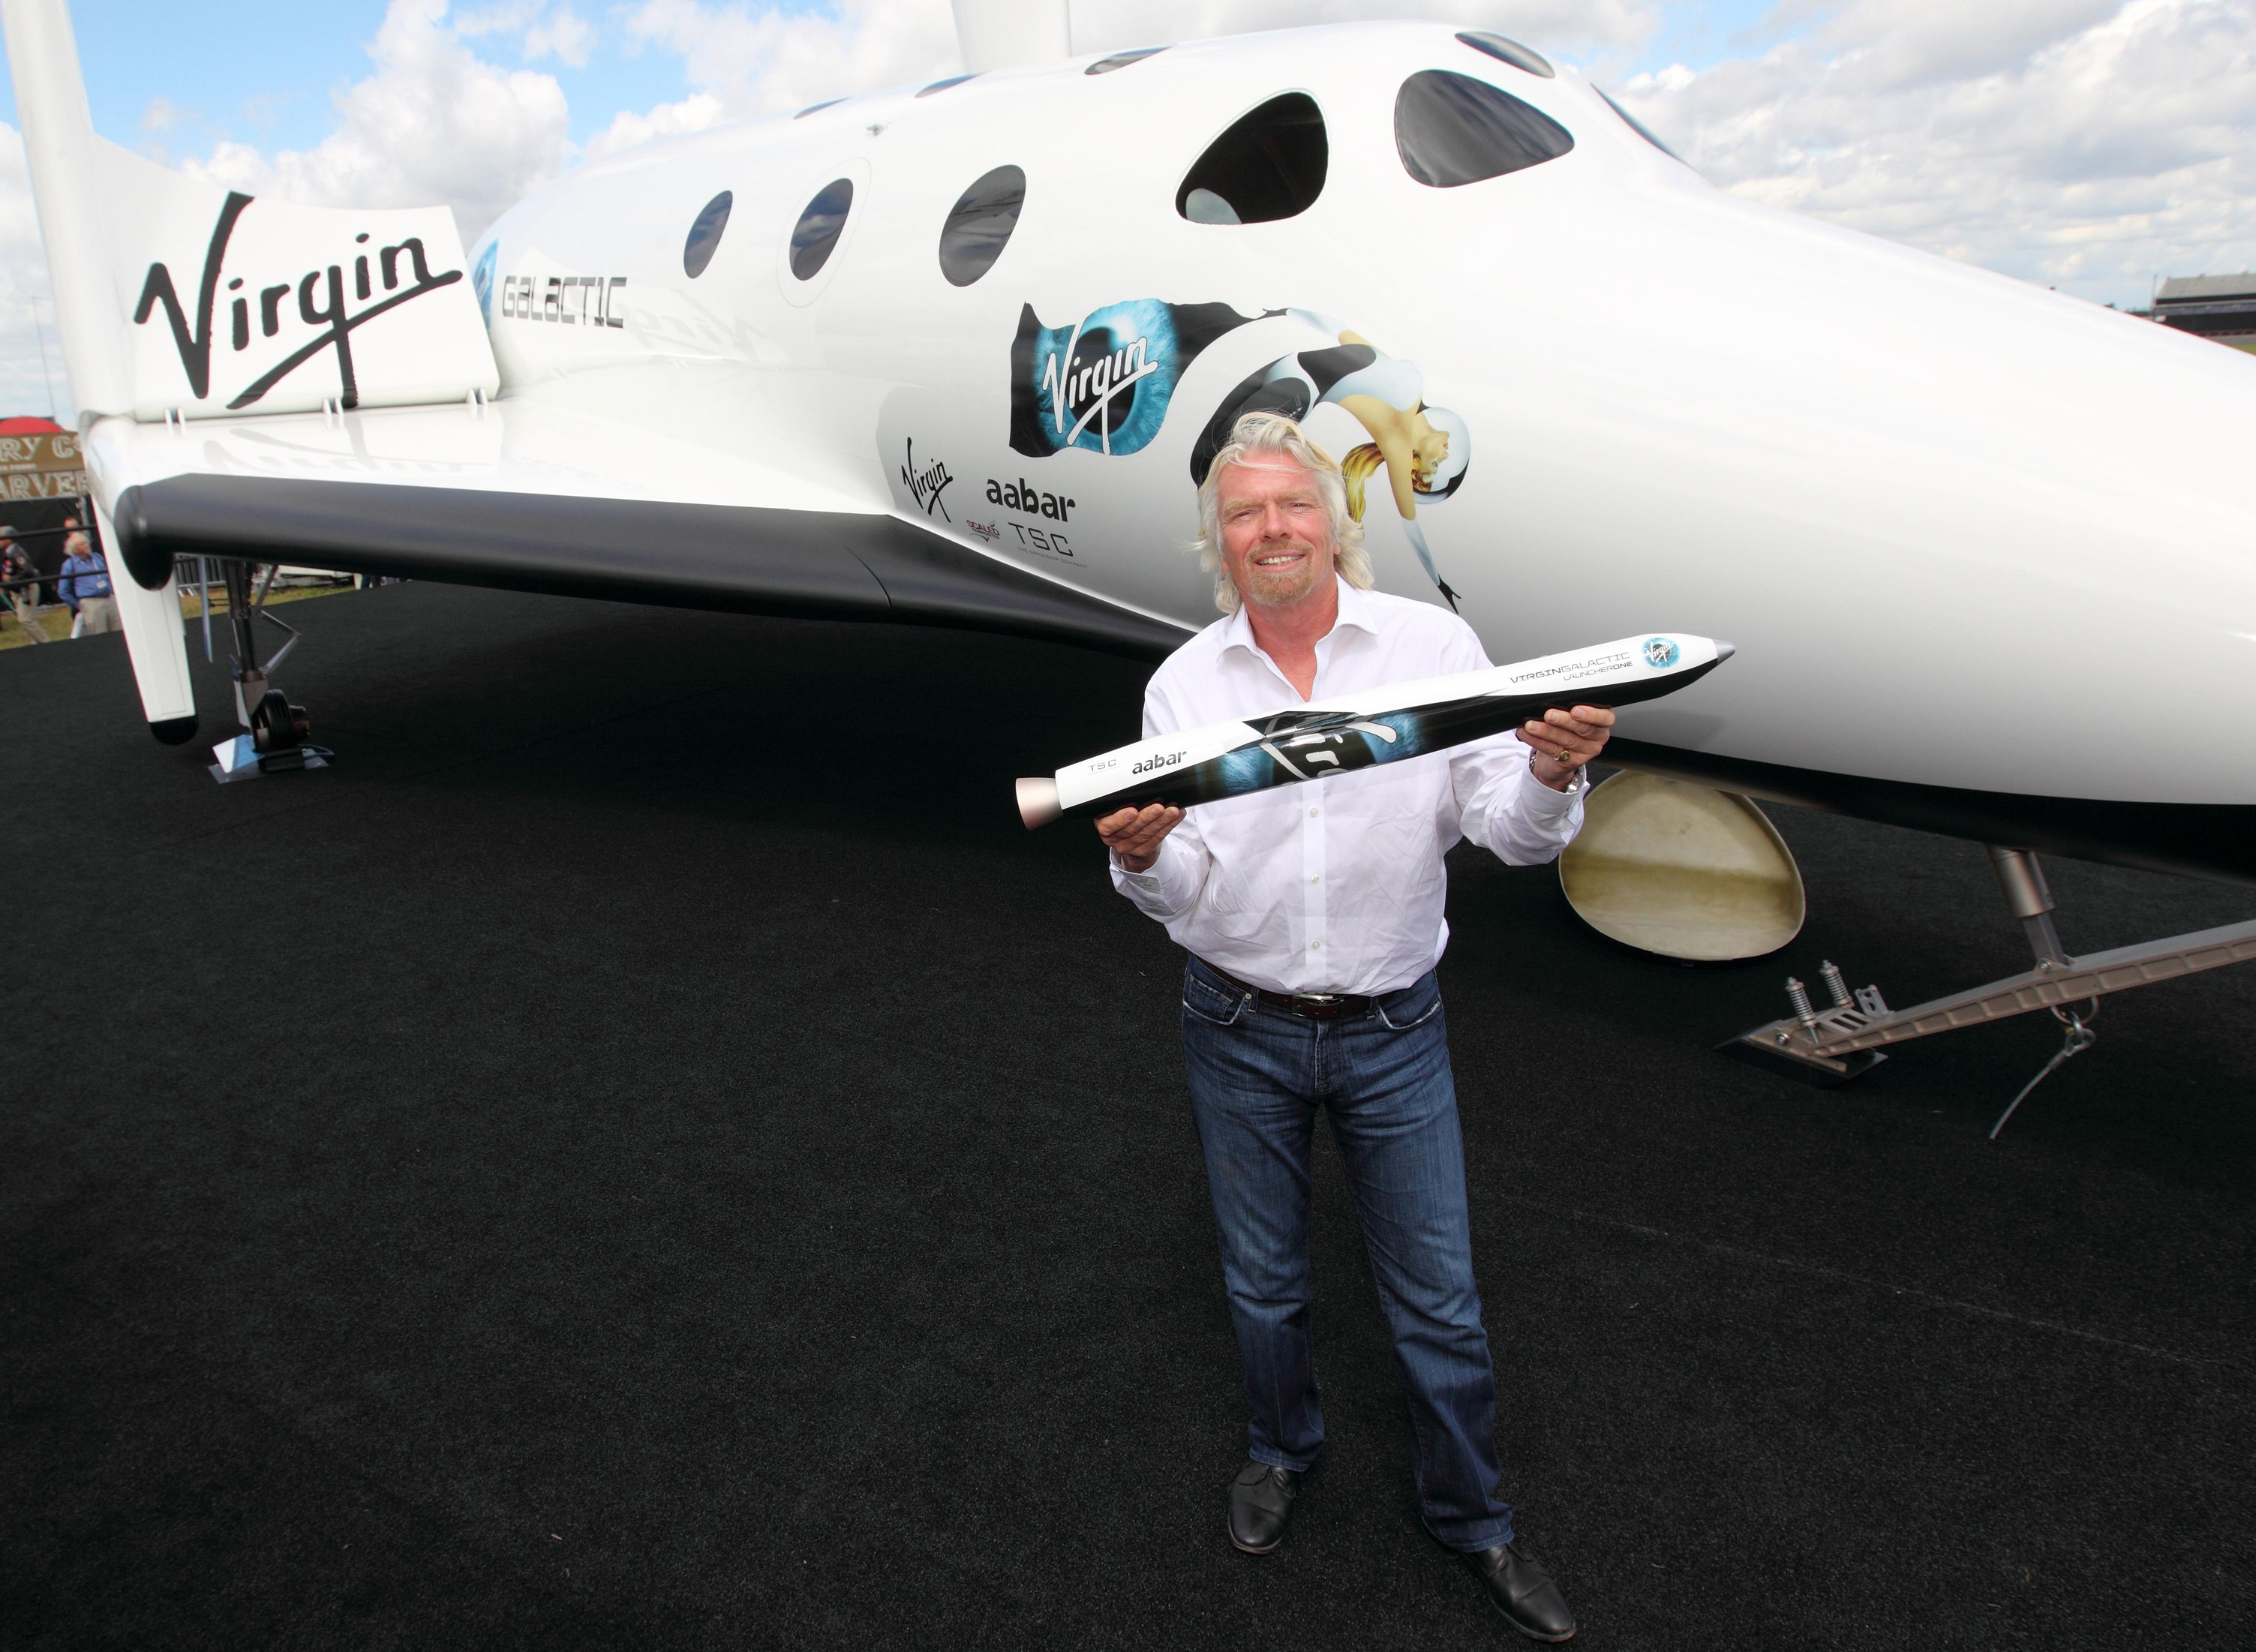 Sir Richard Branson with his Virgin Galactic Space craft at the Farnborough International Airshow 2012 in Hampshire. (Steve Parson/PA)